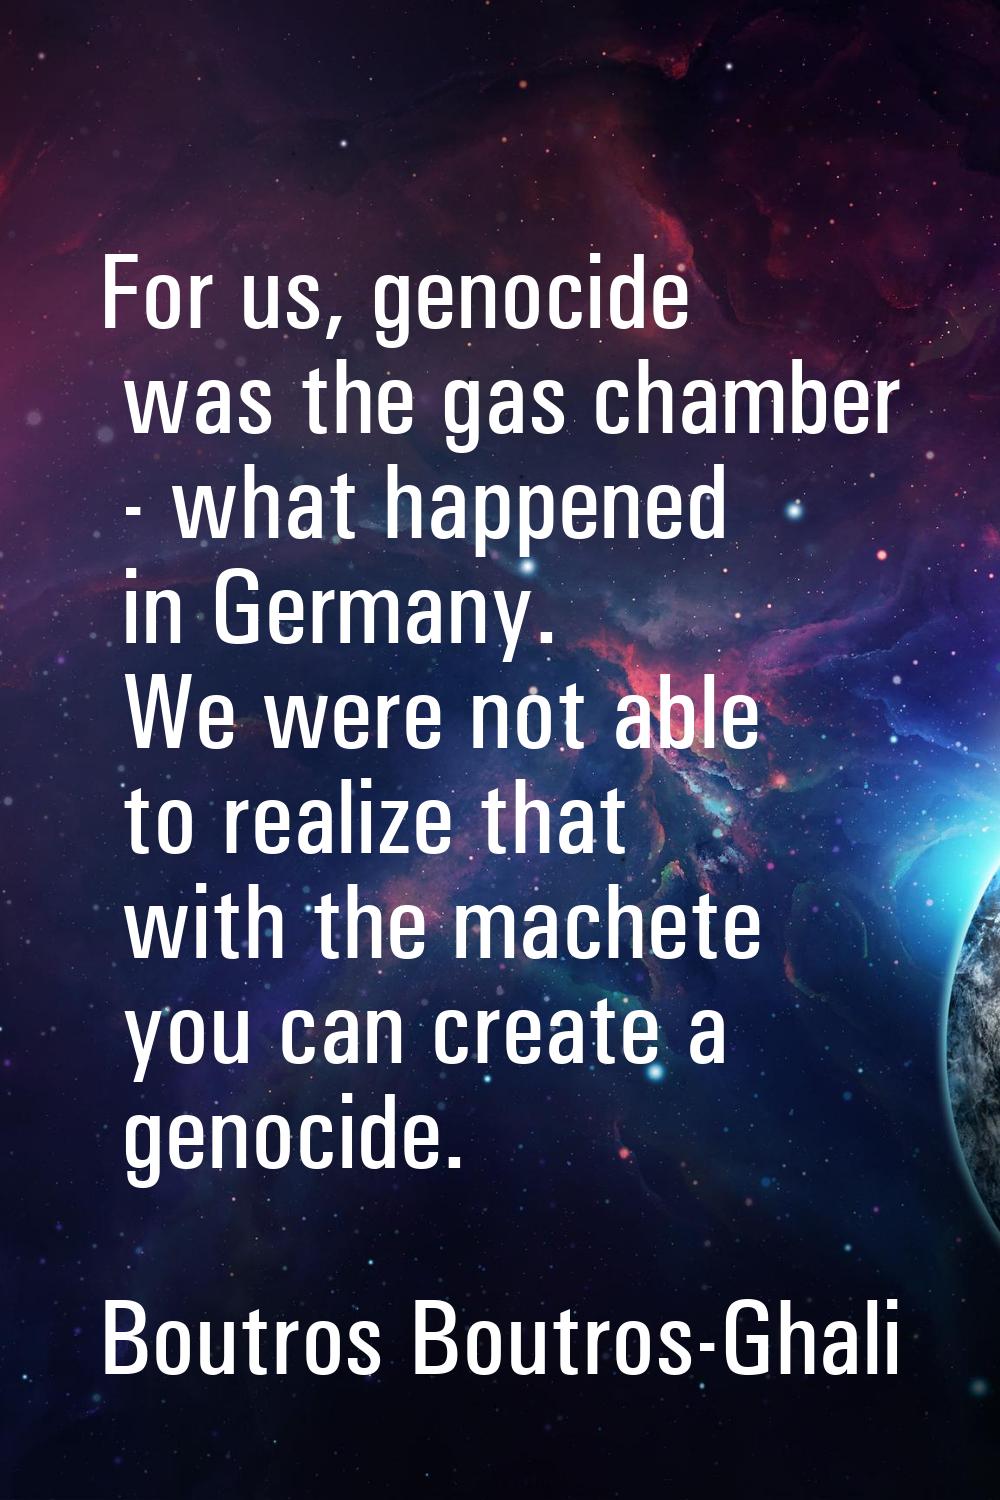 For us, genocide was the gas chamber - what happened in Germany. We were not able to realize that w